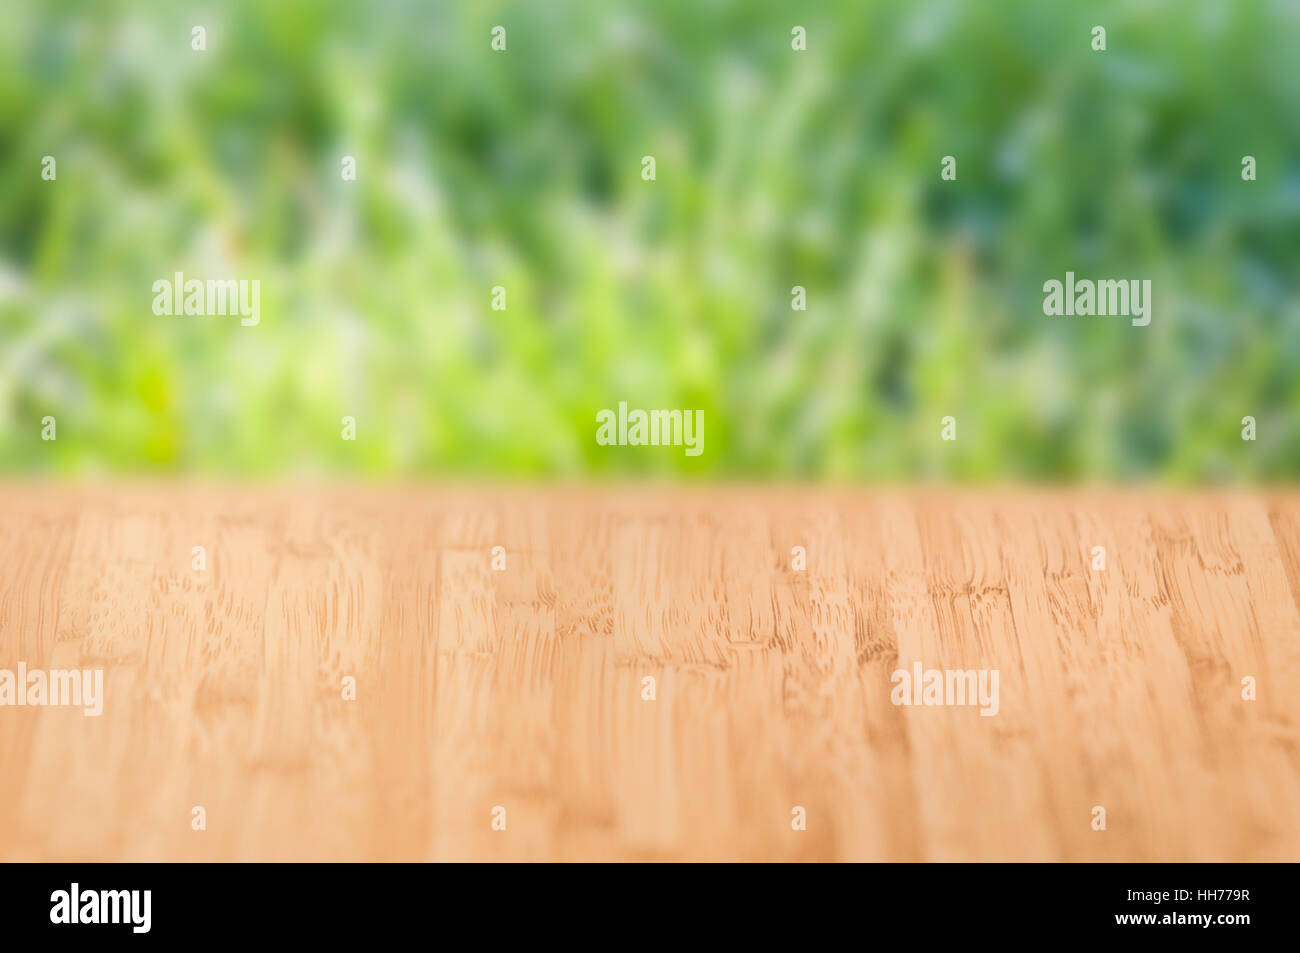 Fresh bright nature background with wooden surface and grass texture Stock Photo